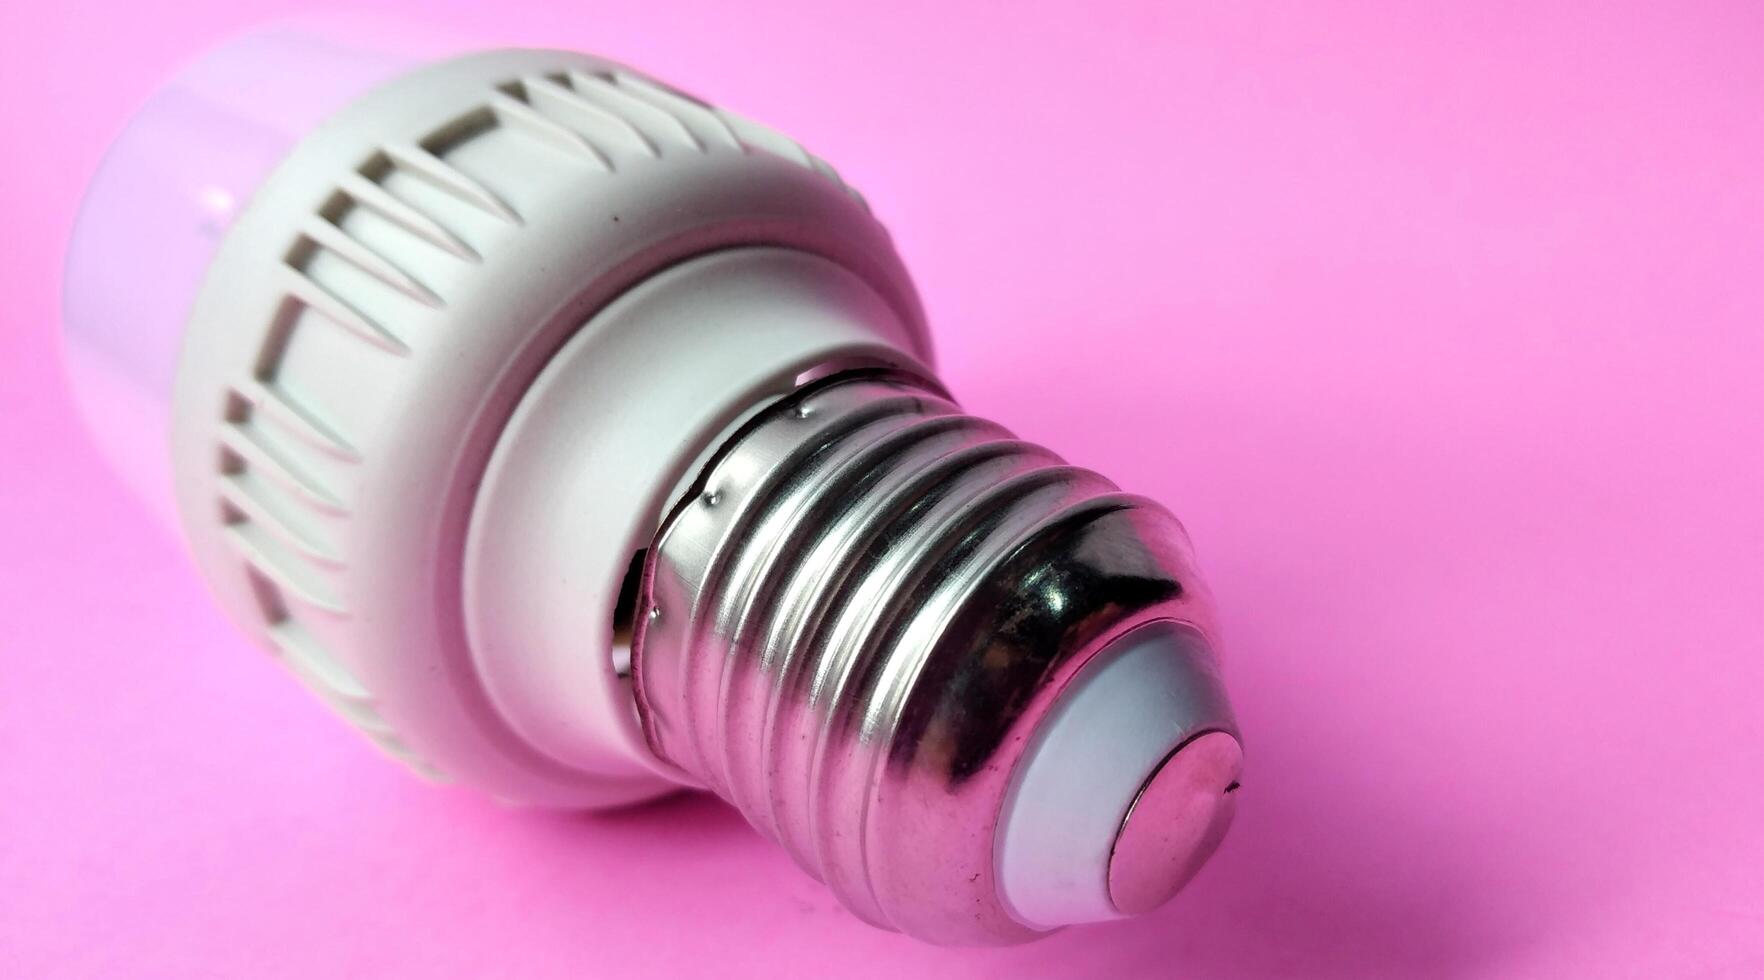 energie besparing LED licht lamp Aan roze achtergrond. energie besparing concept. foto